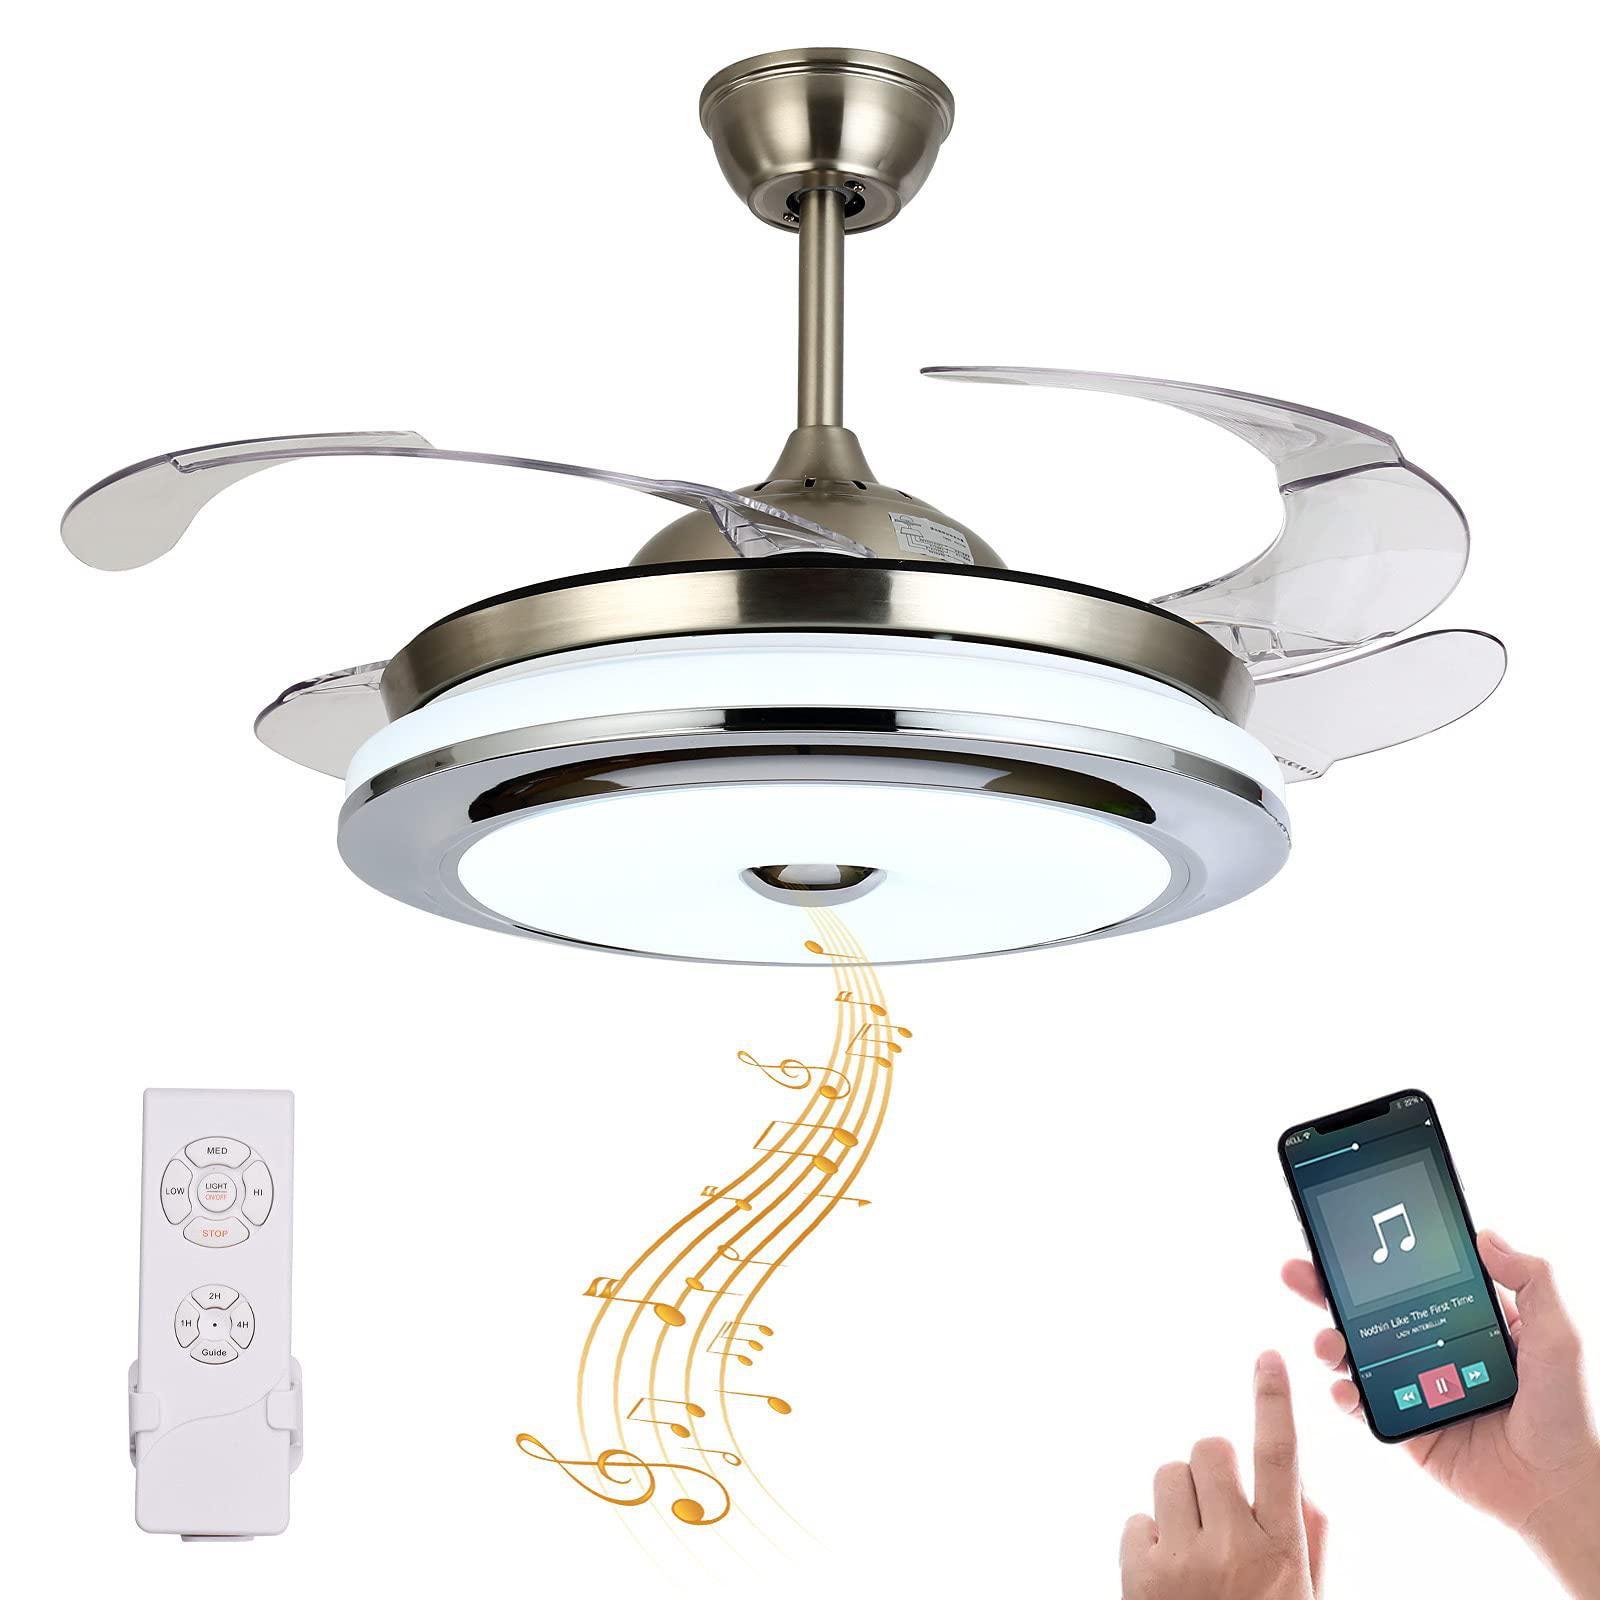 Bavnnro ceiling fans with lights smart bluetooth music player,42 inch led 3 color remote control retractable invisible blades 3 speed